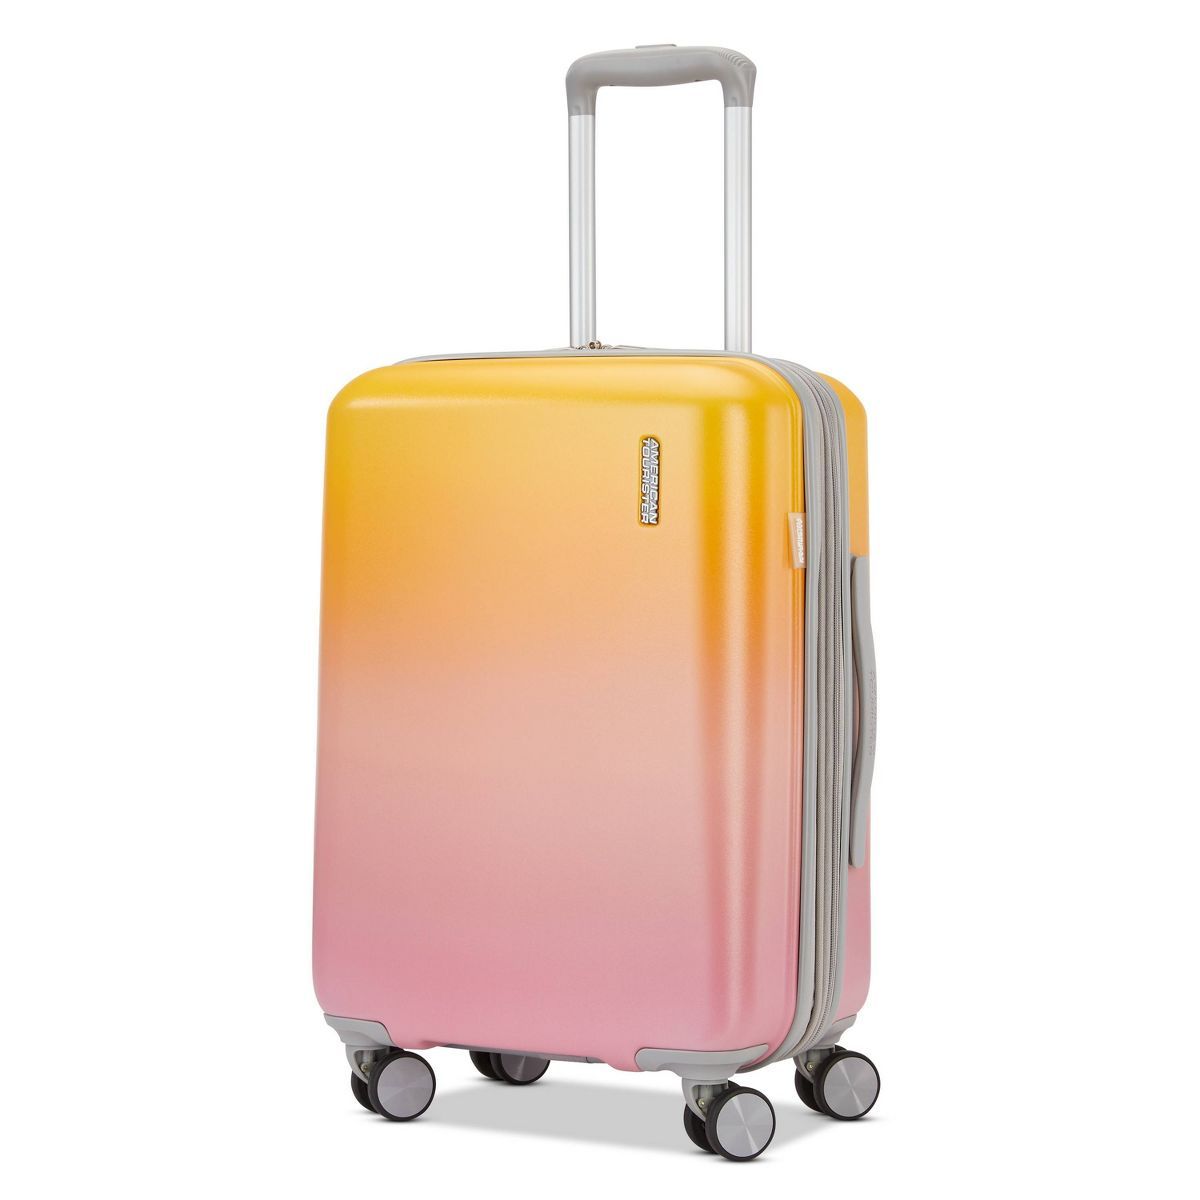 American Tourister Modern Hardside Carry On Spinner Suitcase | Target